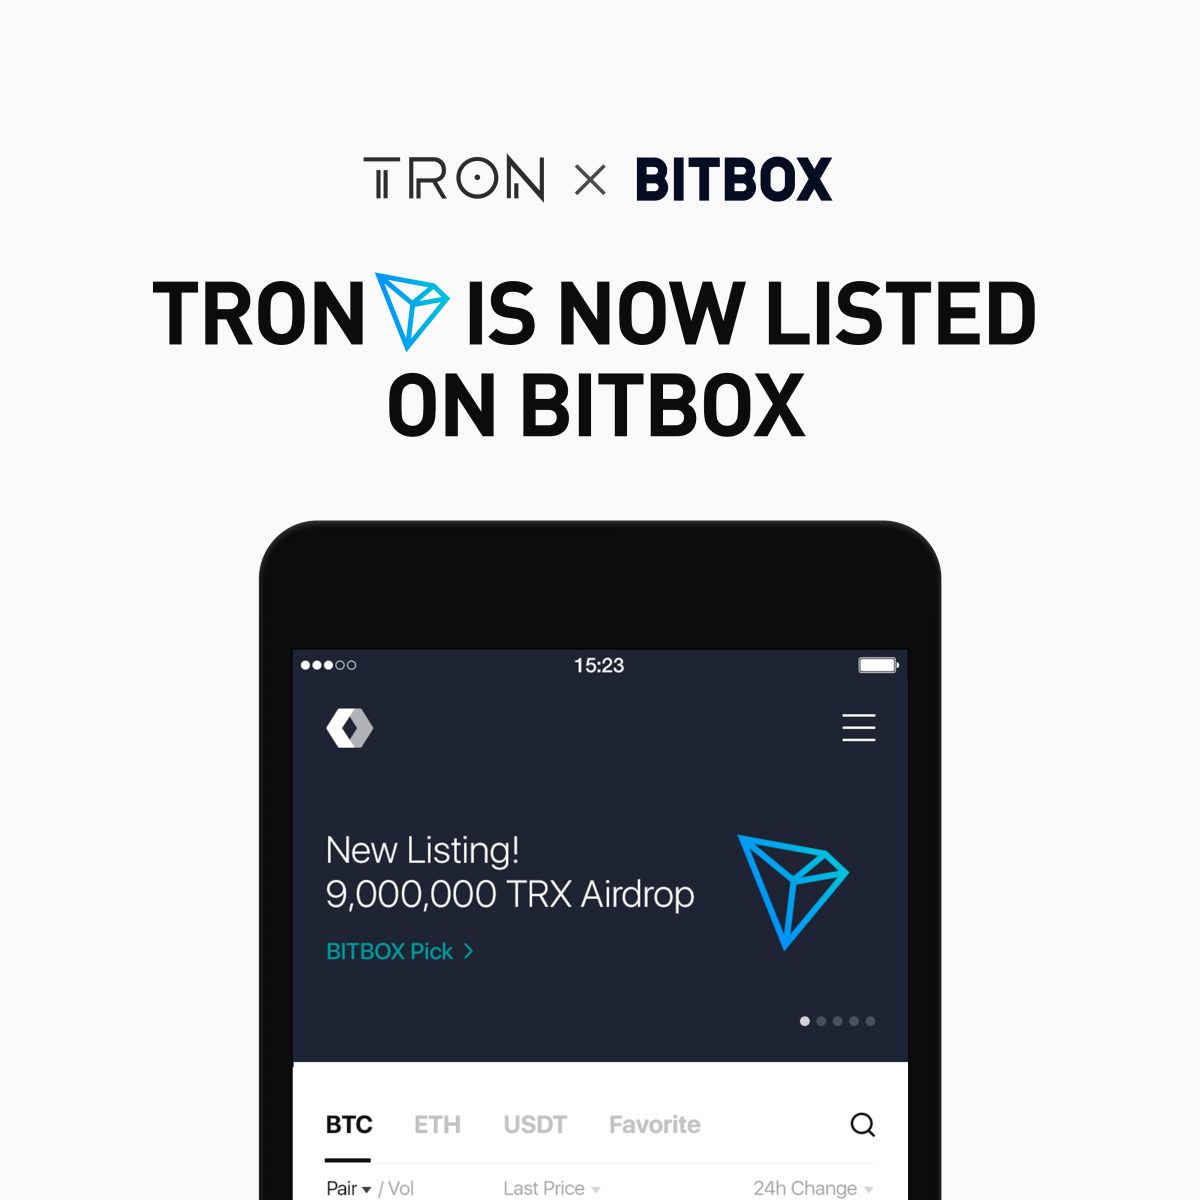 BITBOX and TRON